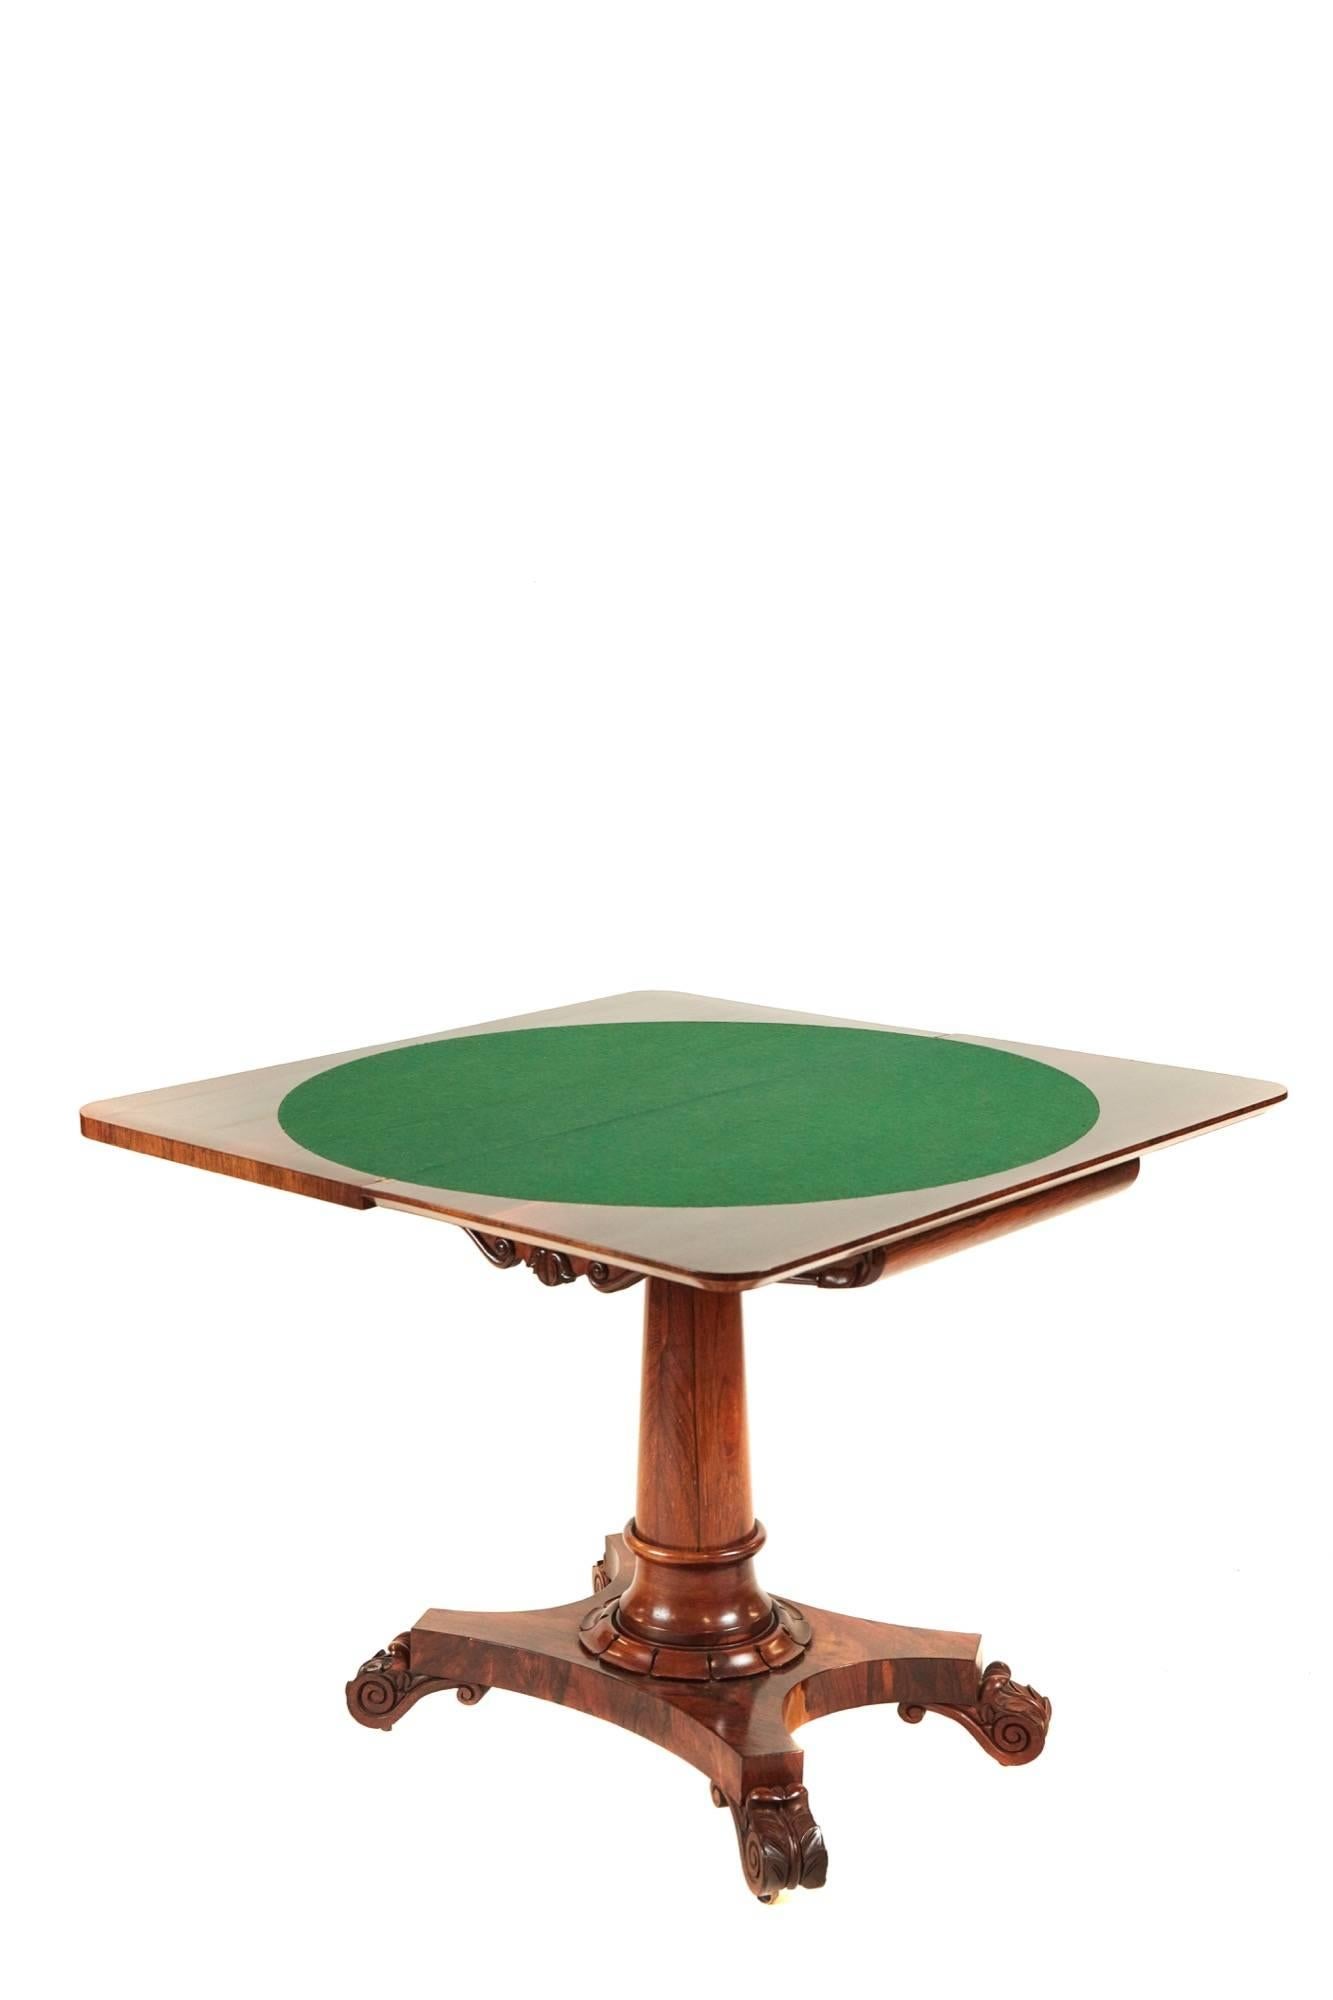 European William IV Rosewood Card Table For Sale